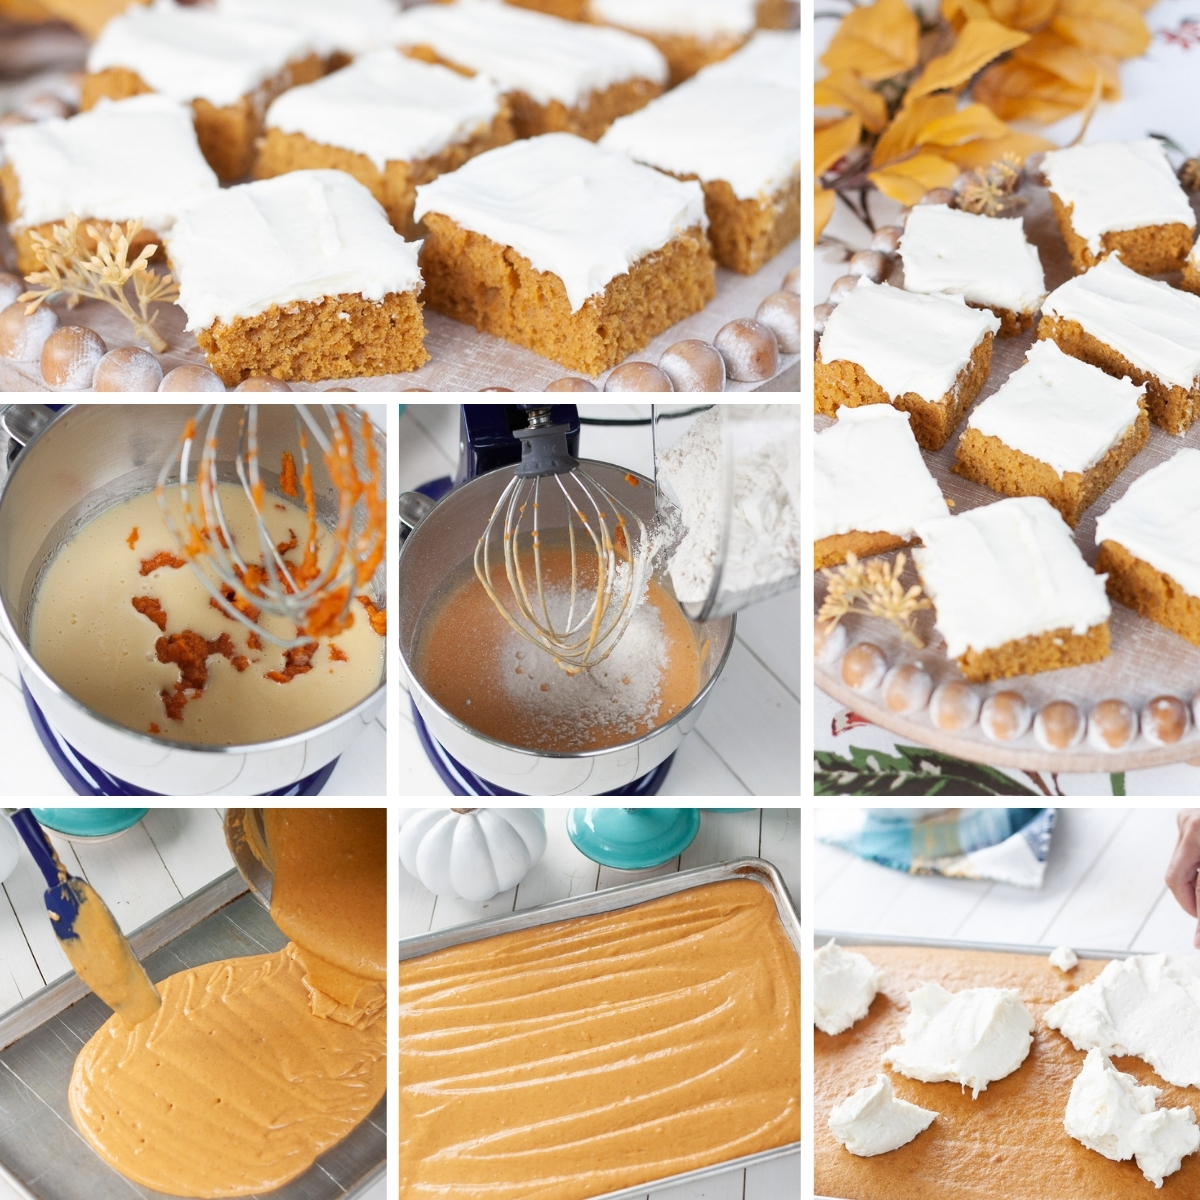 pumpkin bars being made - collage of images showing the steps